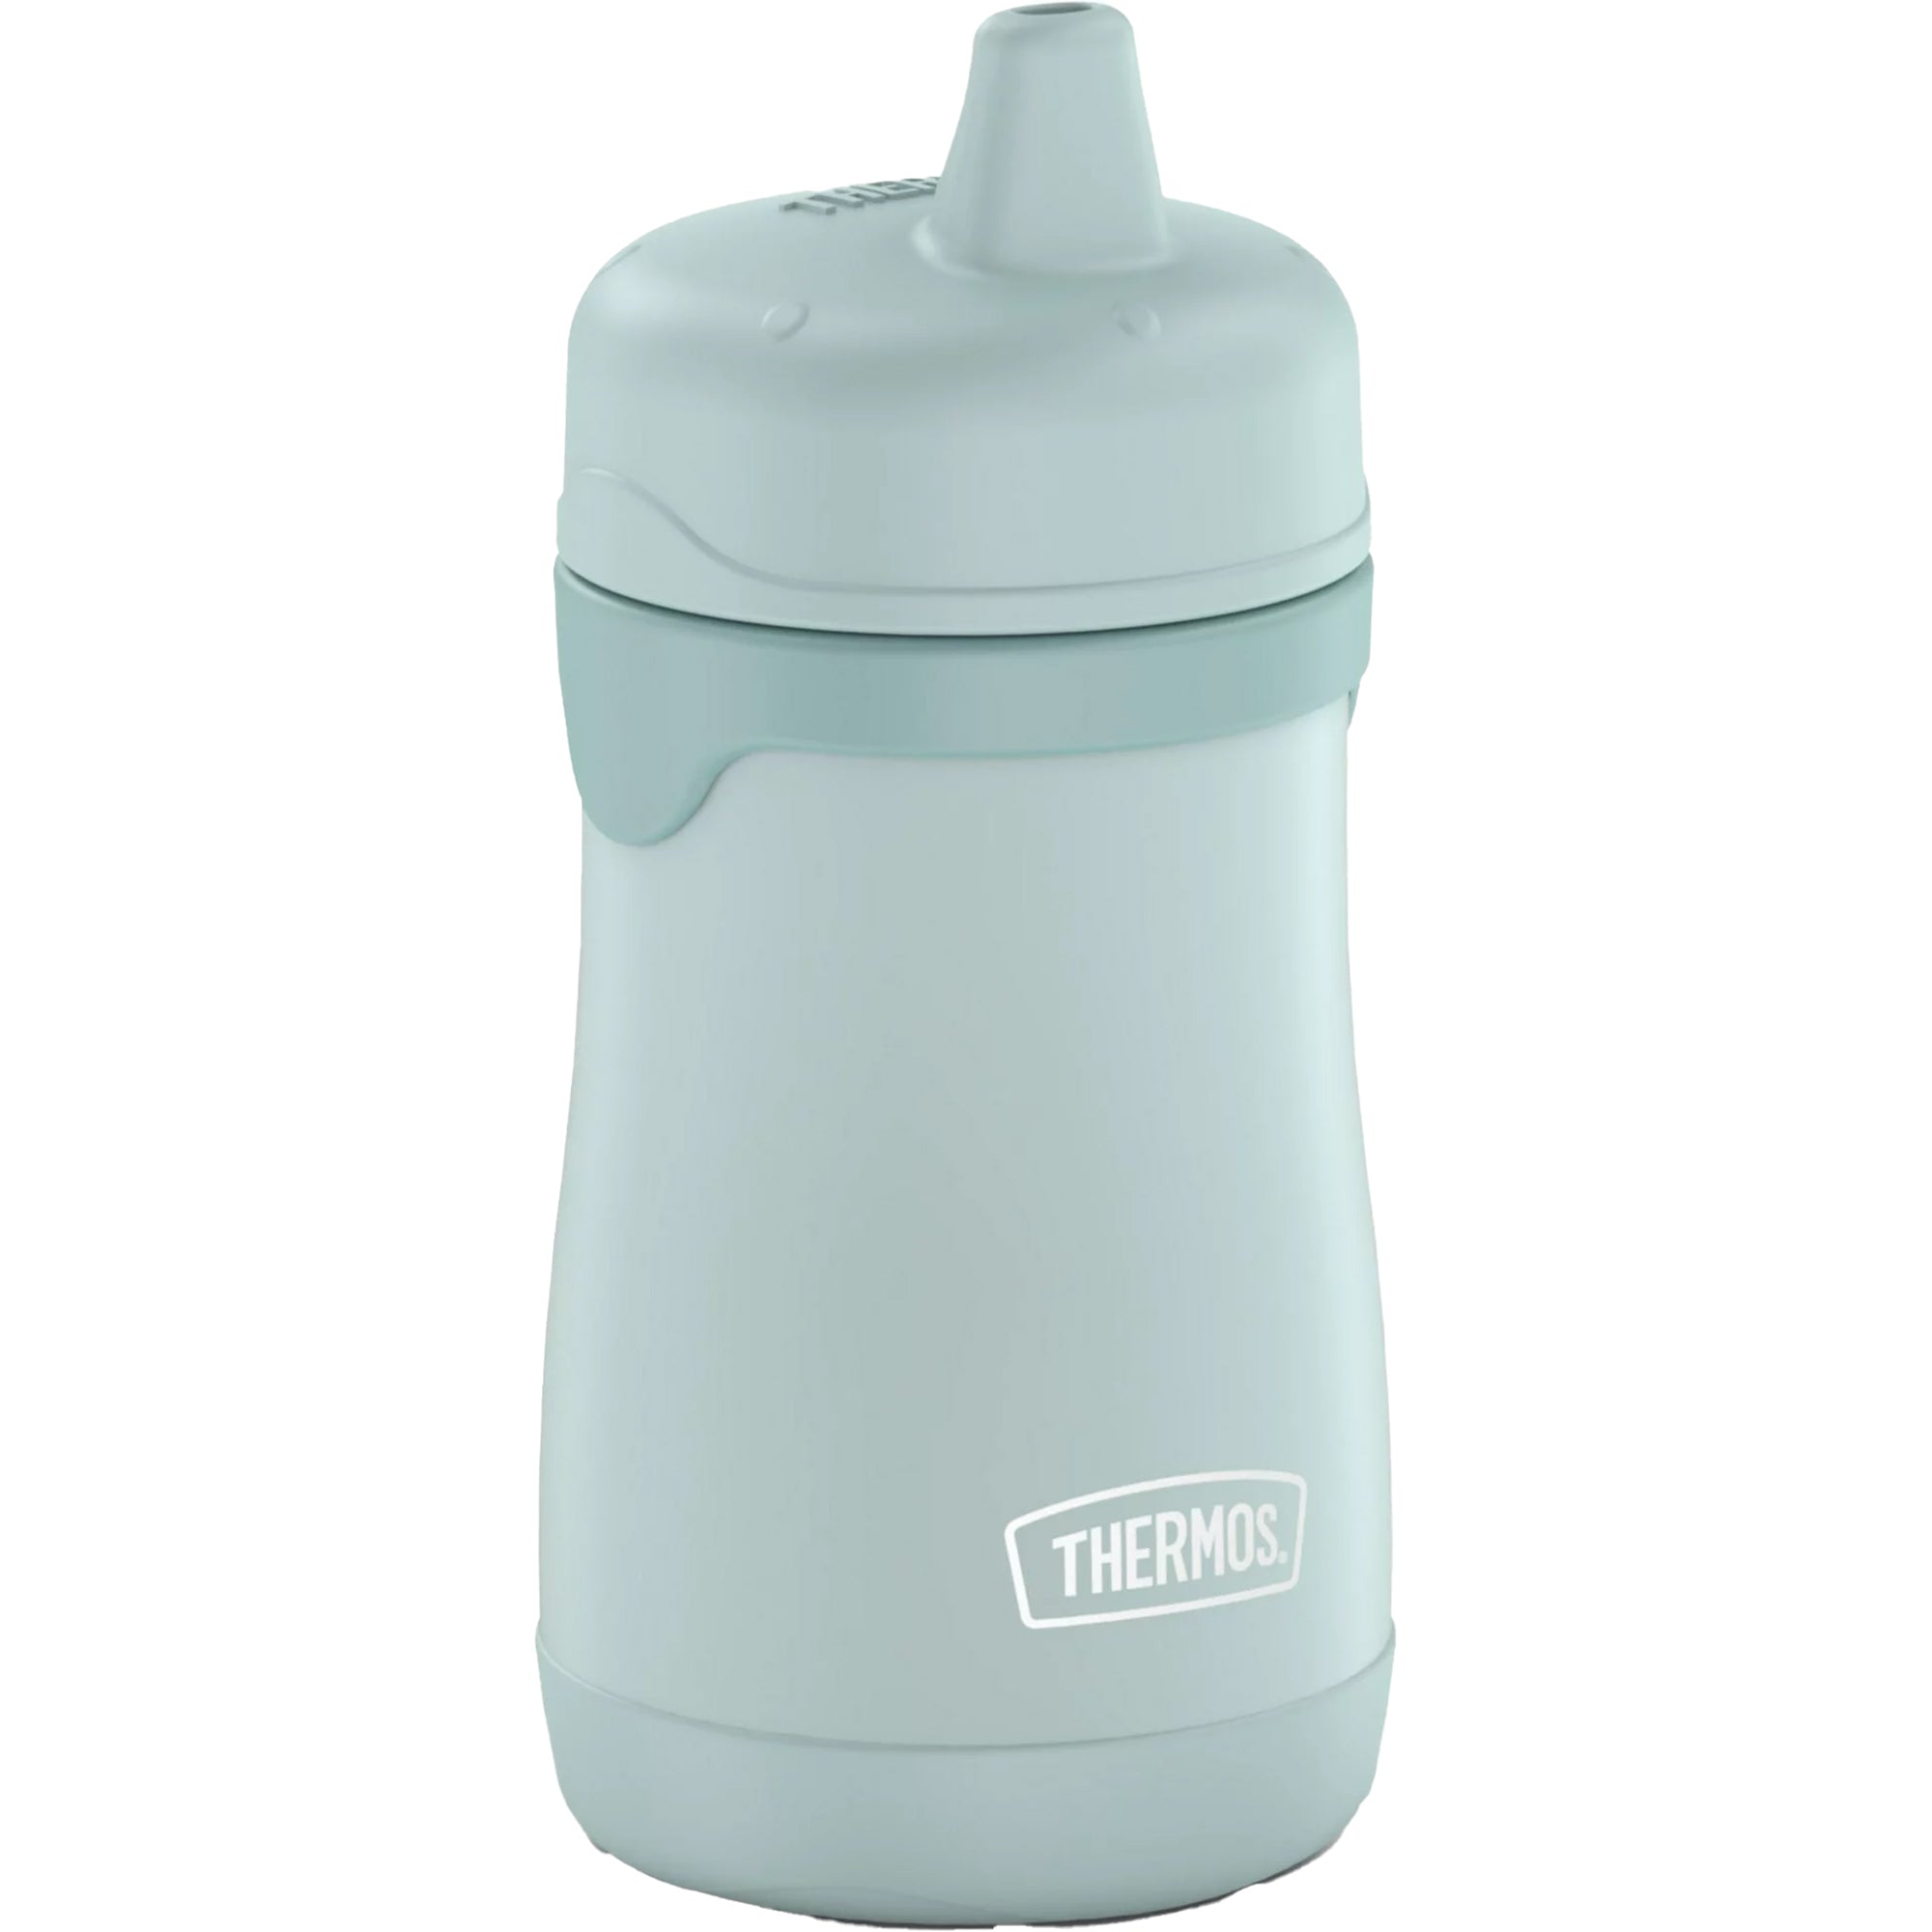 Thermos Baby 10 oz. Simple Pastels Insulated Stainless Steel Sippy Cup - Mint Thermos